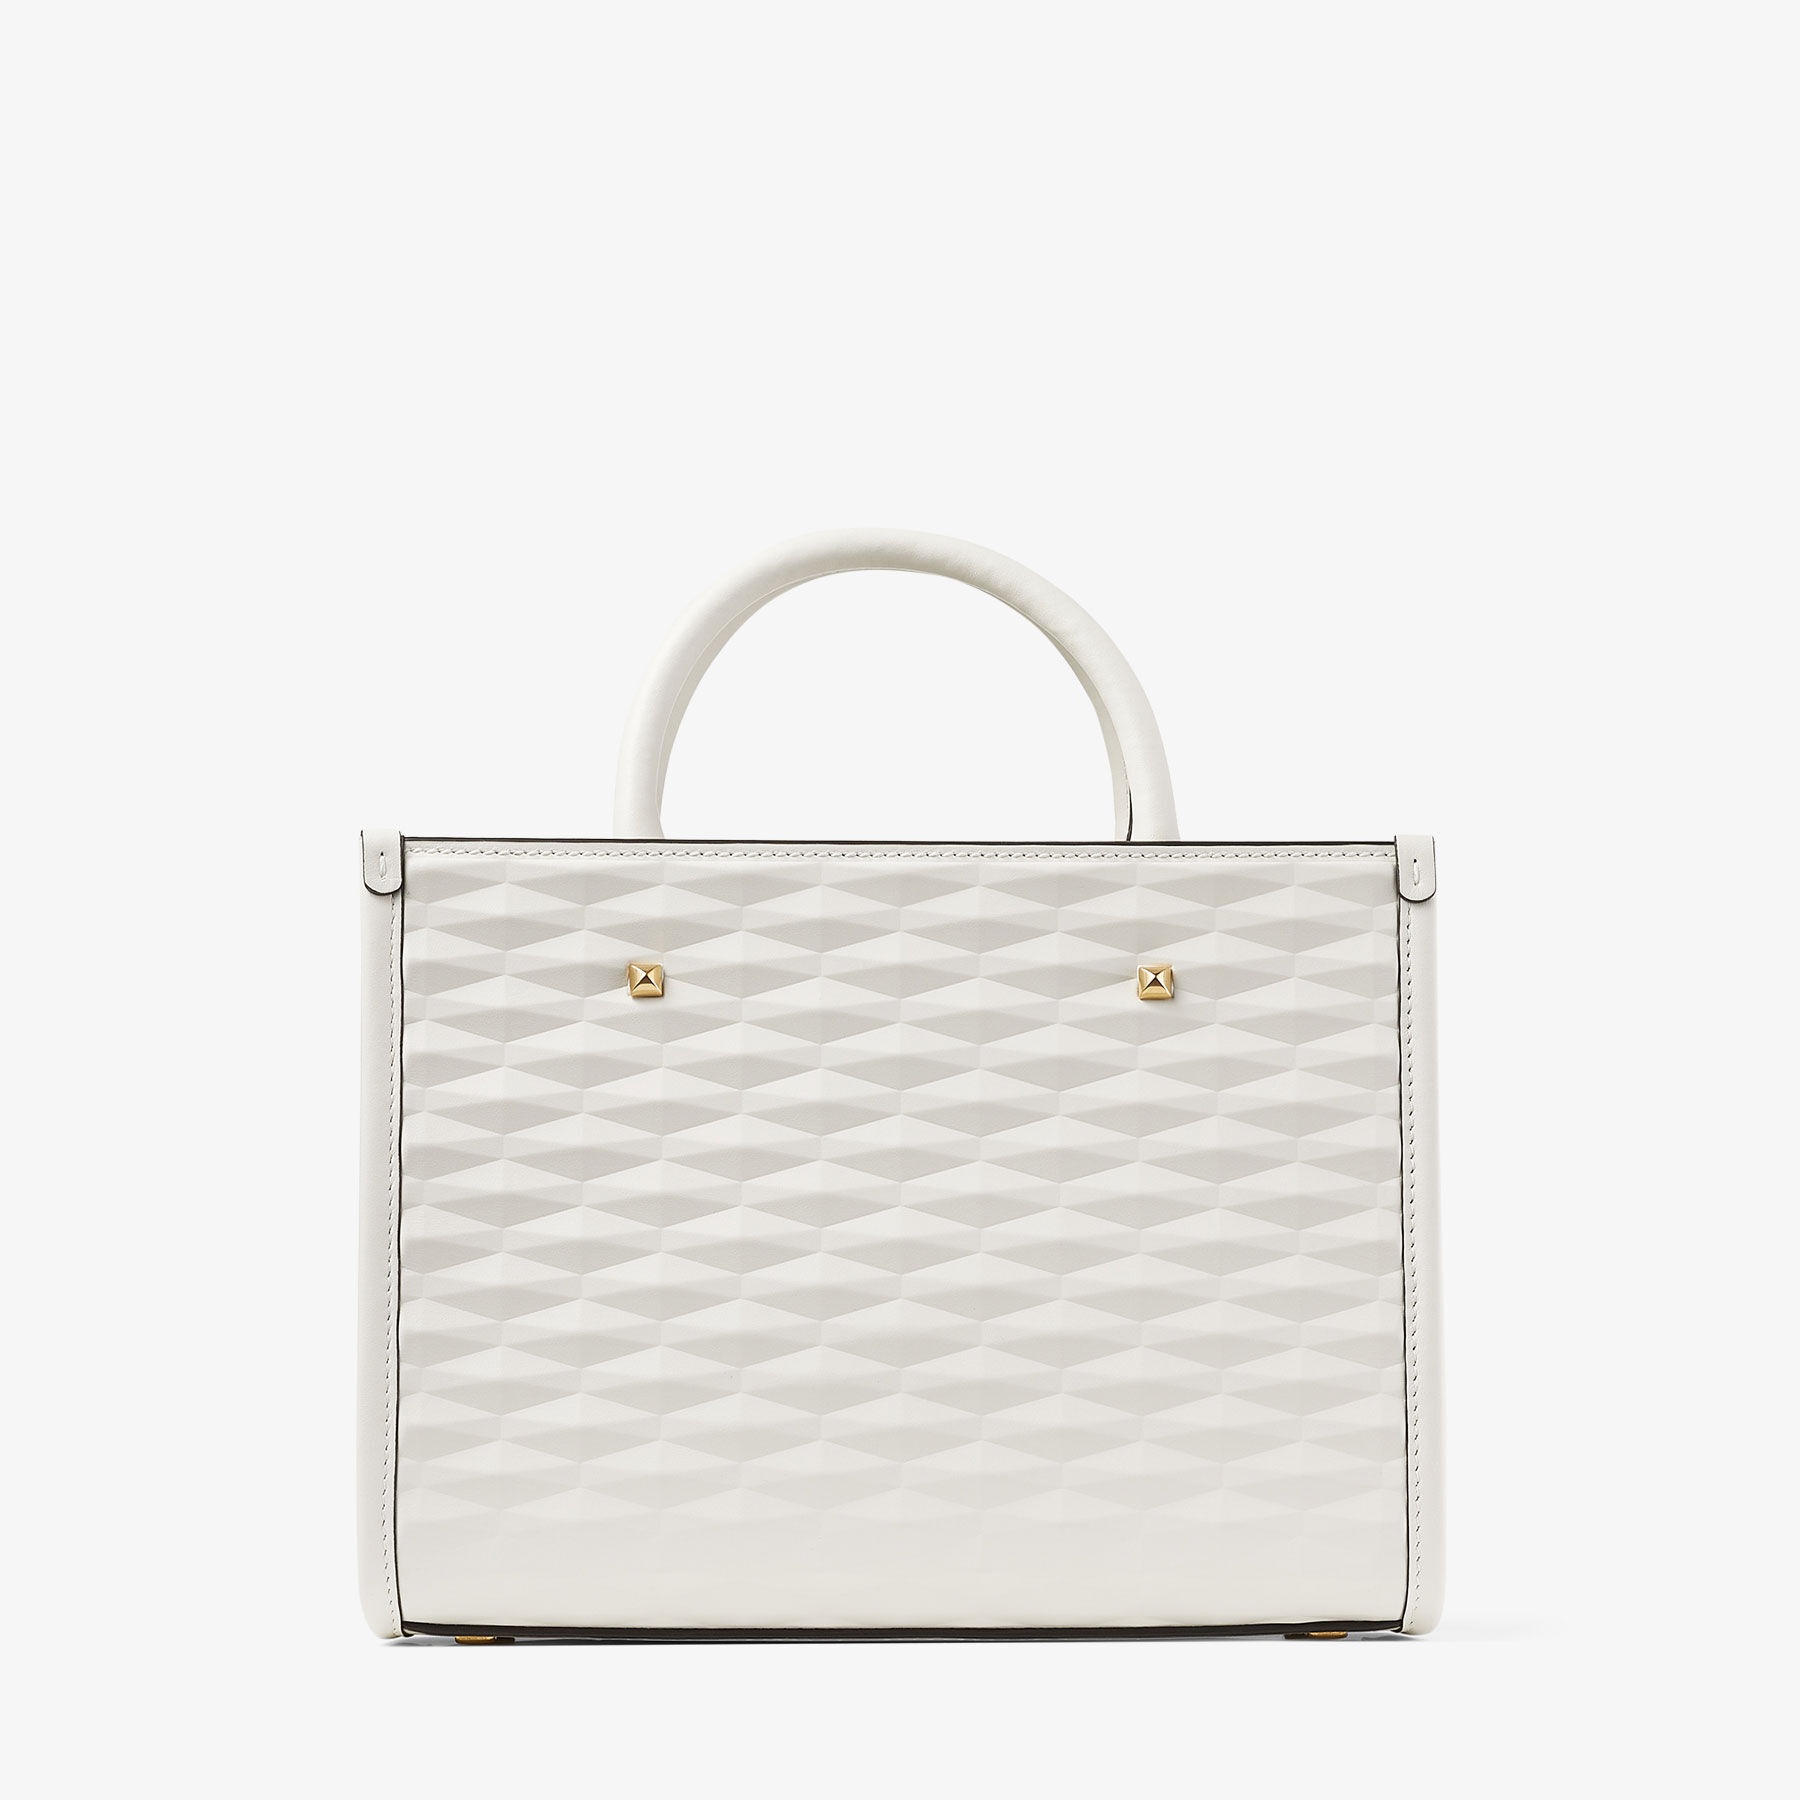 Avenue S Tote
White Diamond Embossed 3D Leather Tote Bag - 7